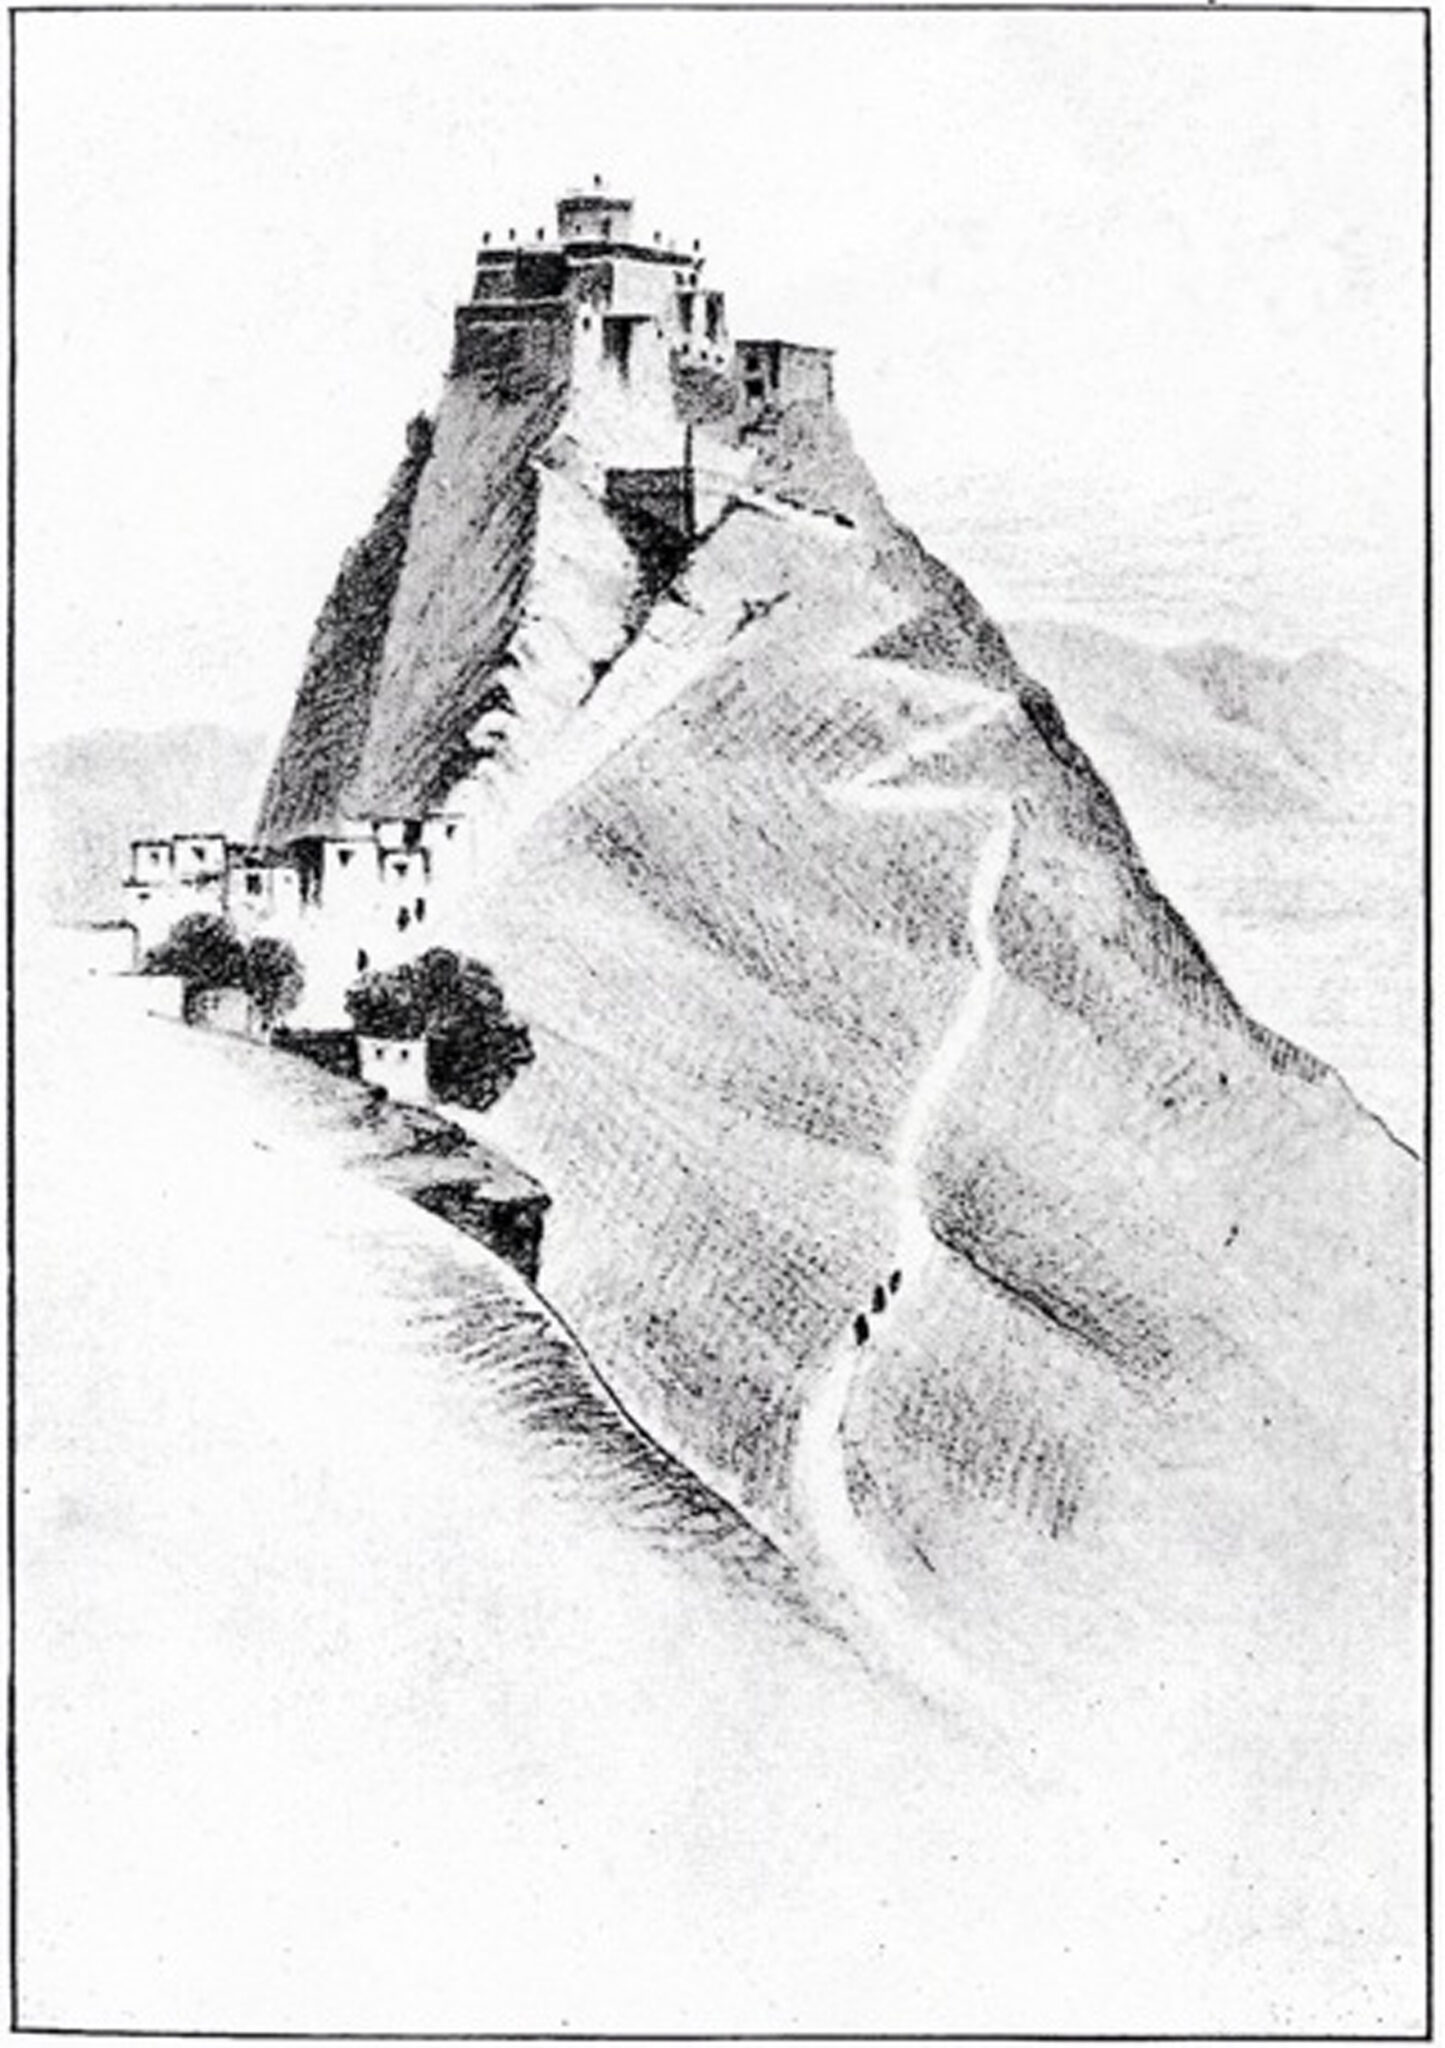 Pencil drawing depicting two building complexes situated on peak and spur of mountain outcropping